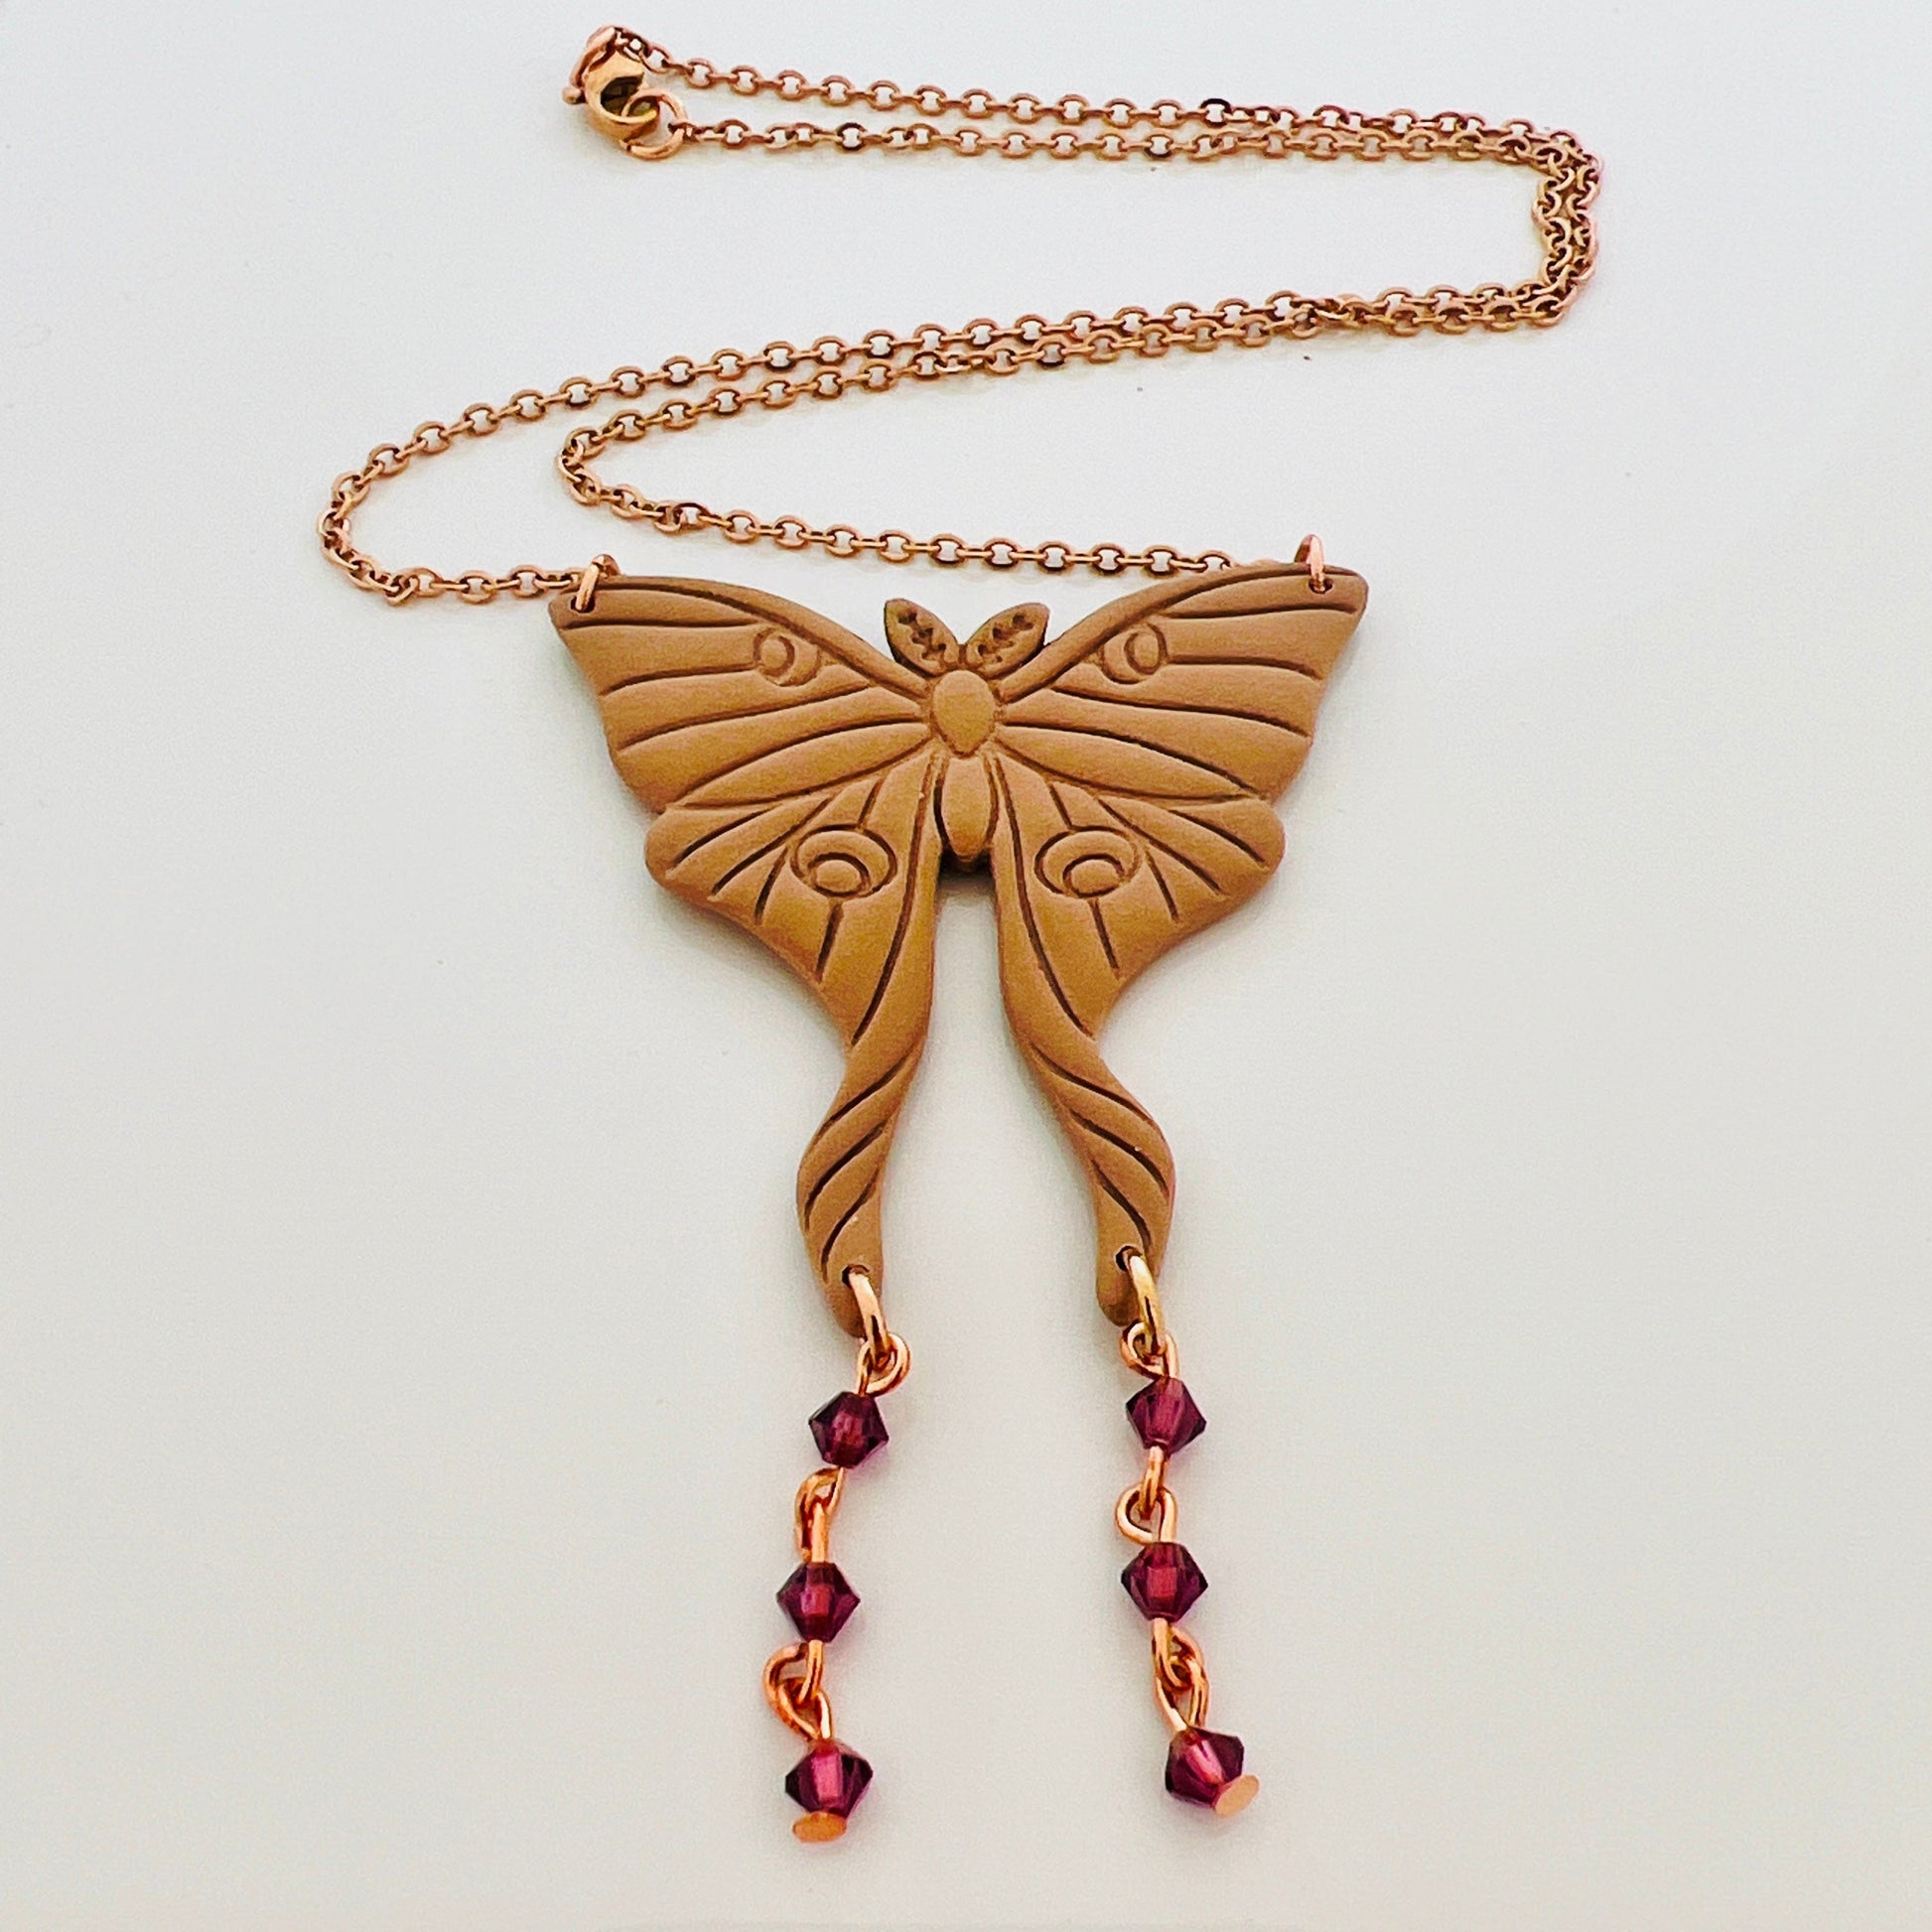 Necklace Brown & Gold with Fuschia Bicone Beads Moth Necklace with Beads